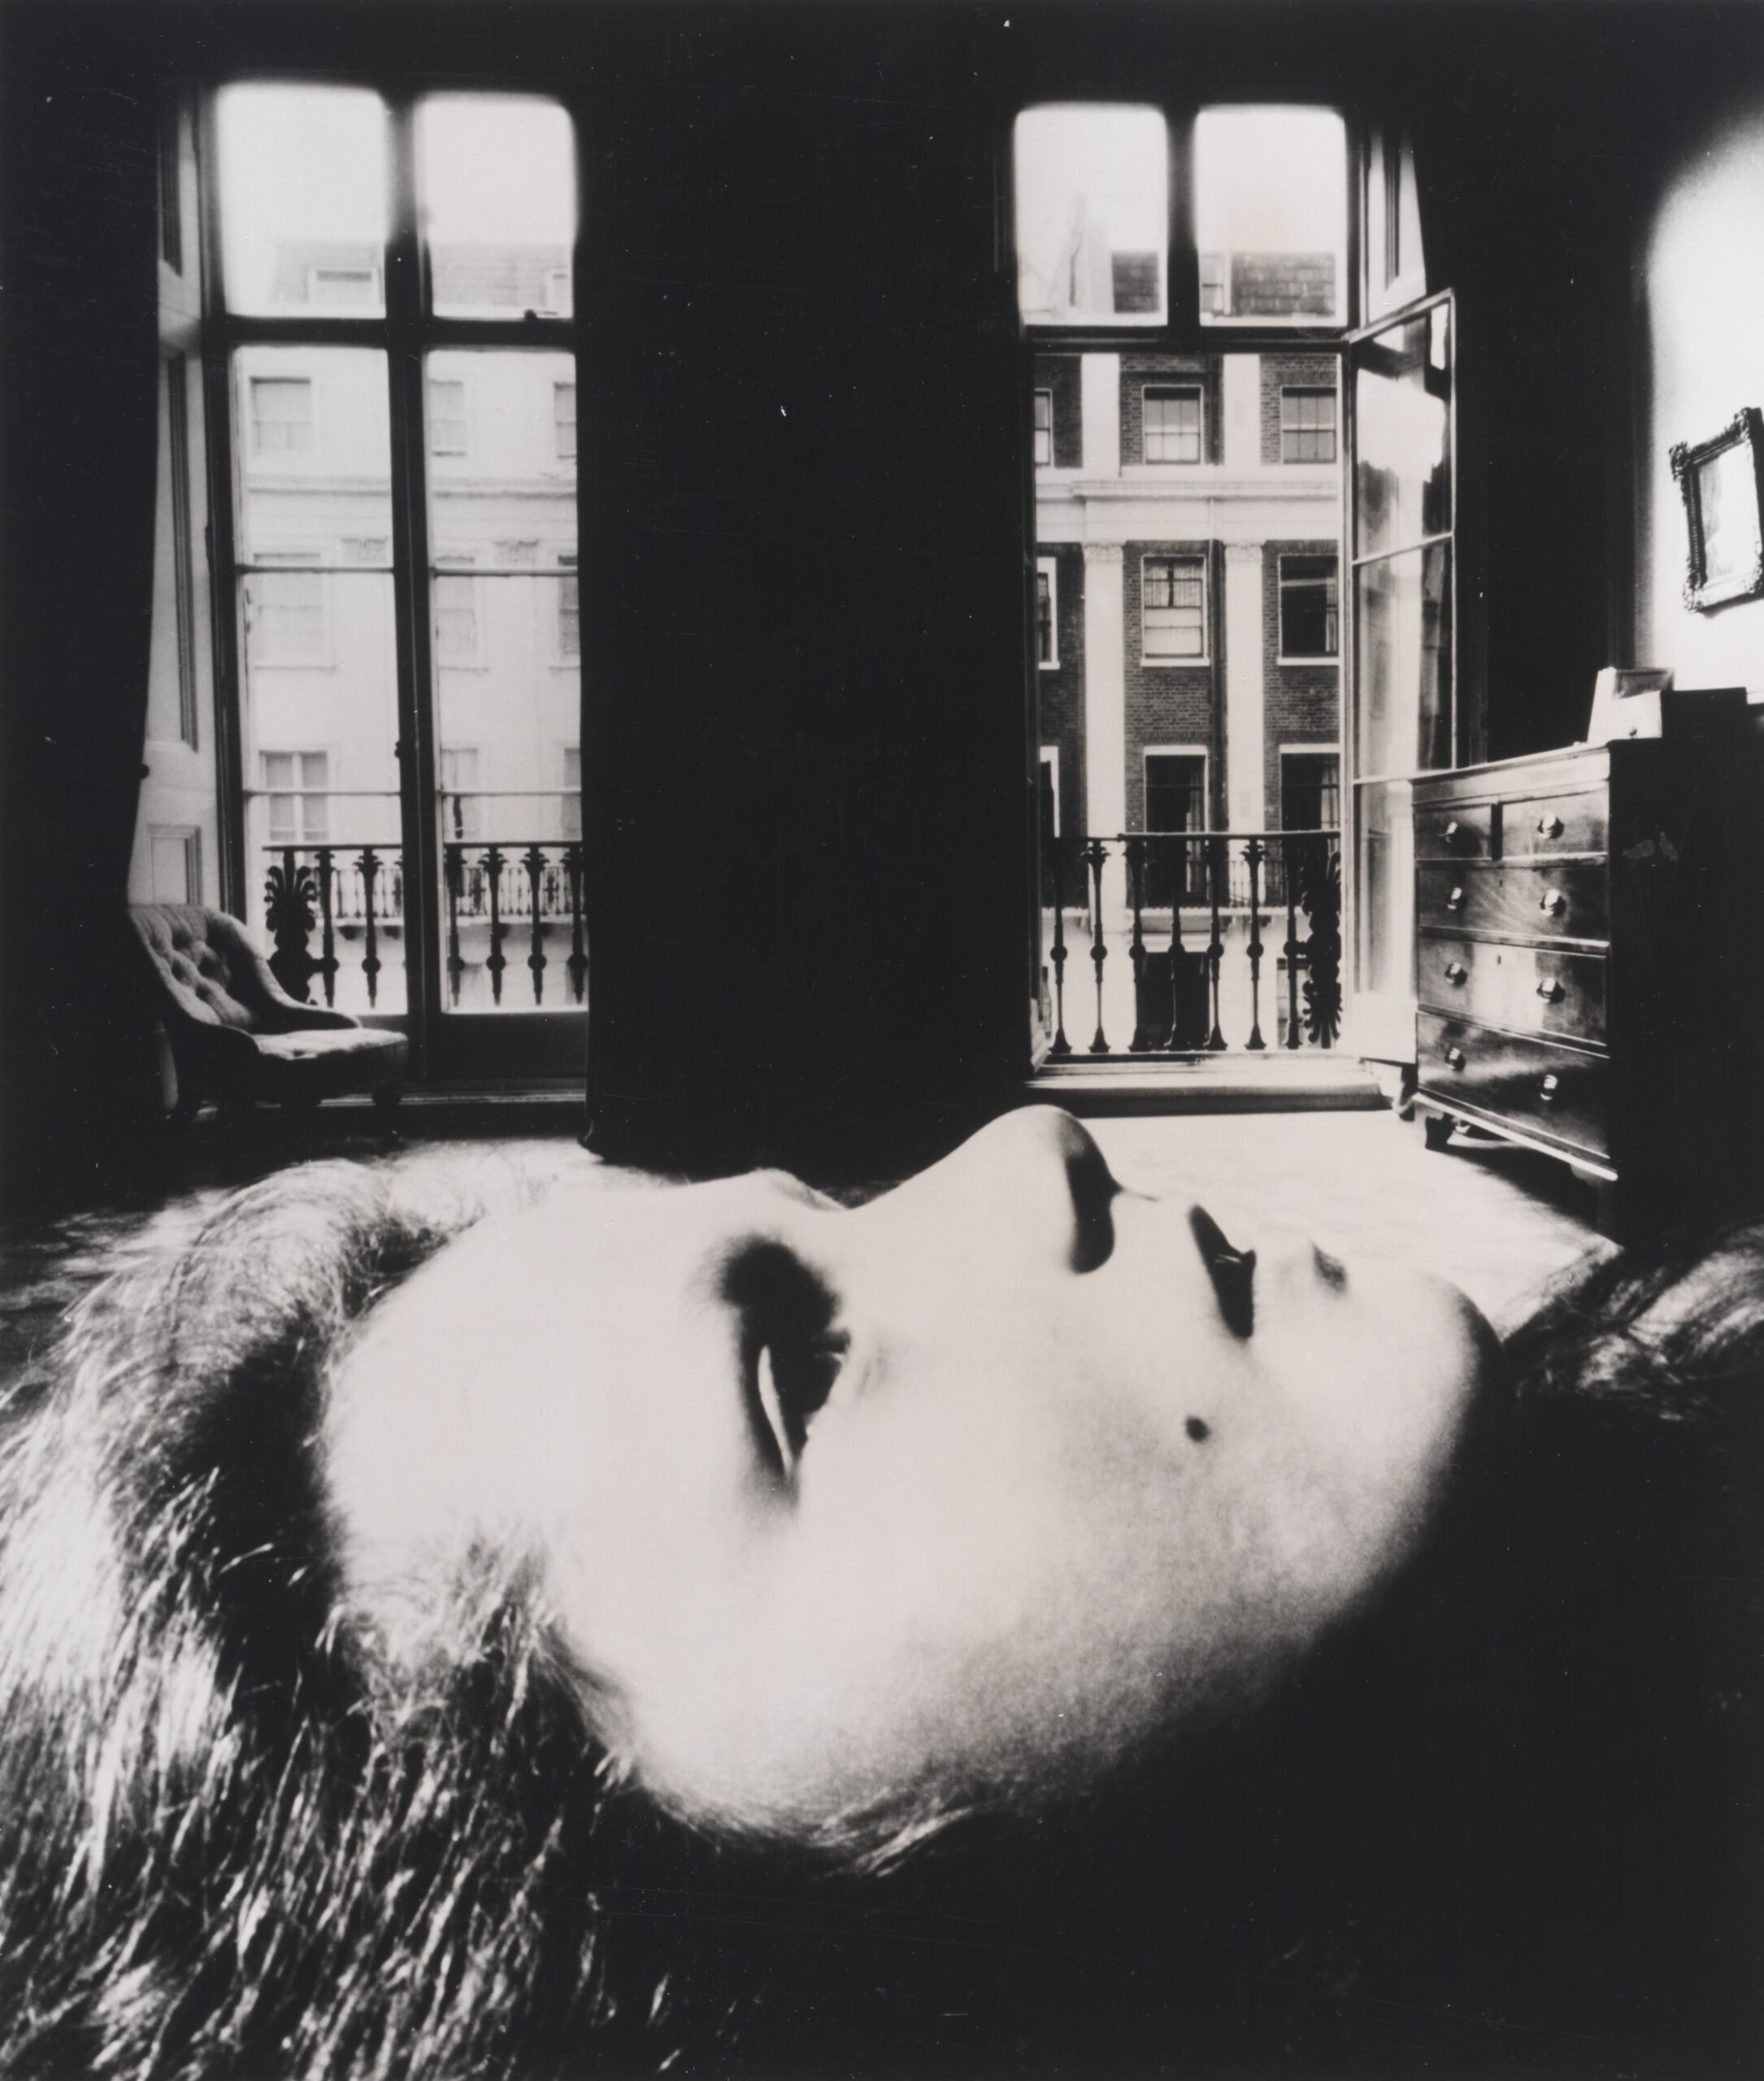 Bill Brandt, Portrait of a Young Girl, Eaton Place 1955. Tate. Gift Eric and Louise Franck London Collection 2013. © The Estate of Bill Brandt